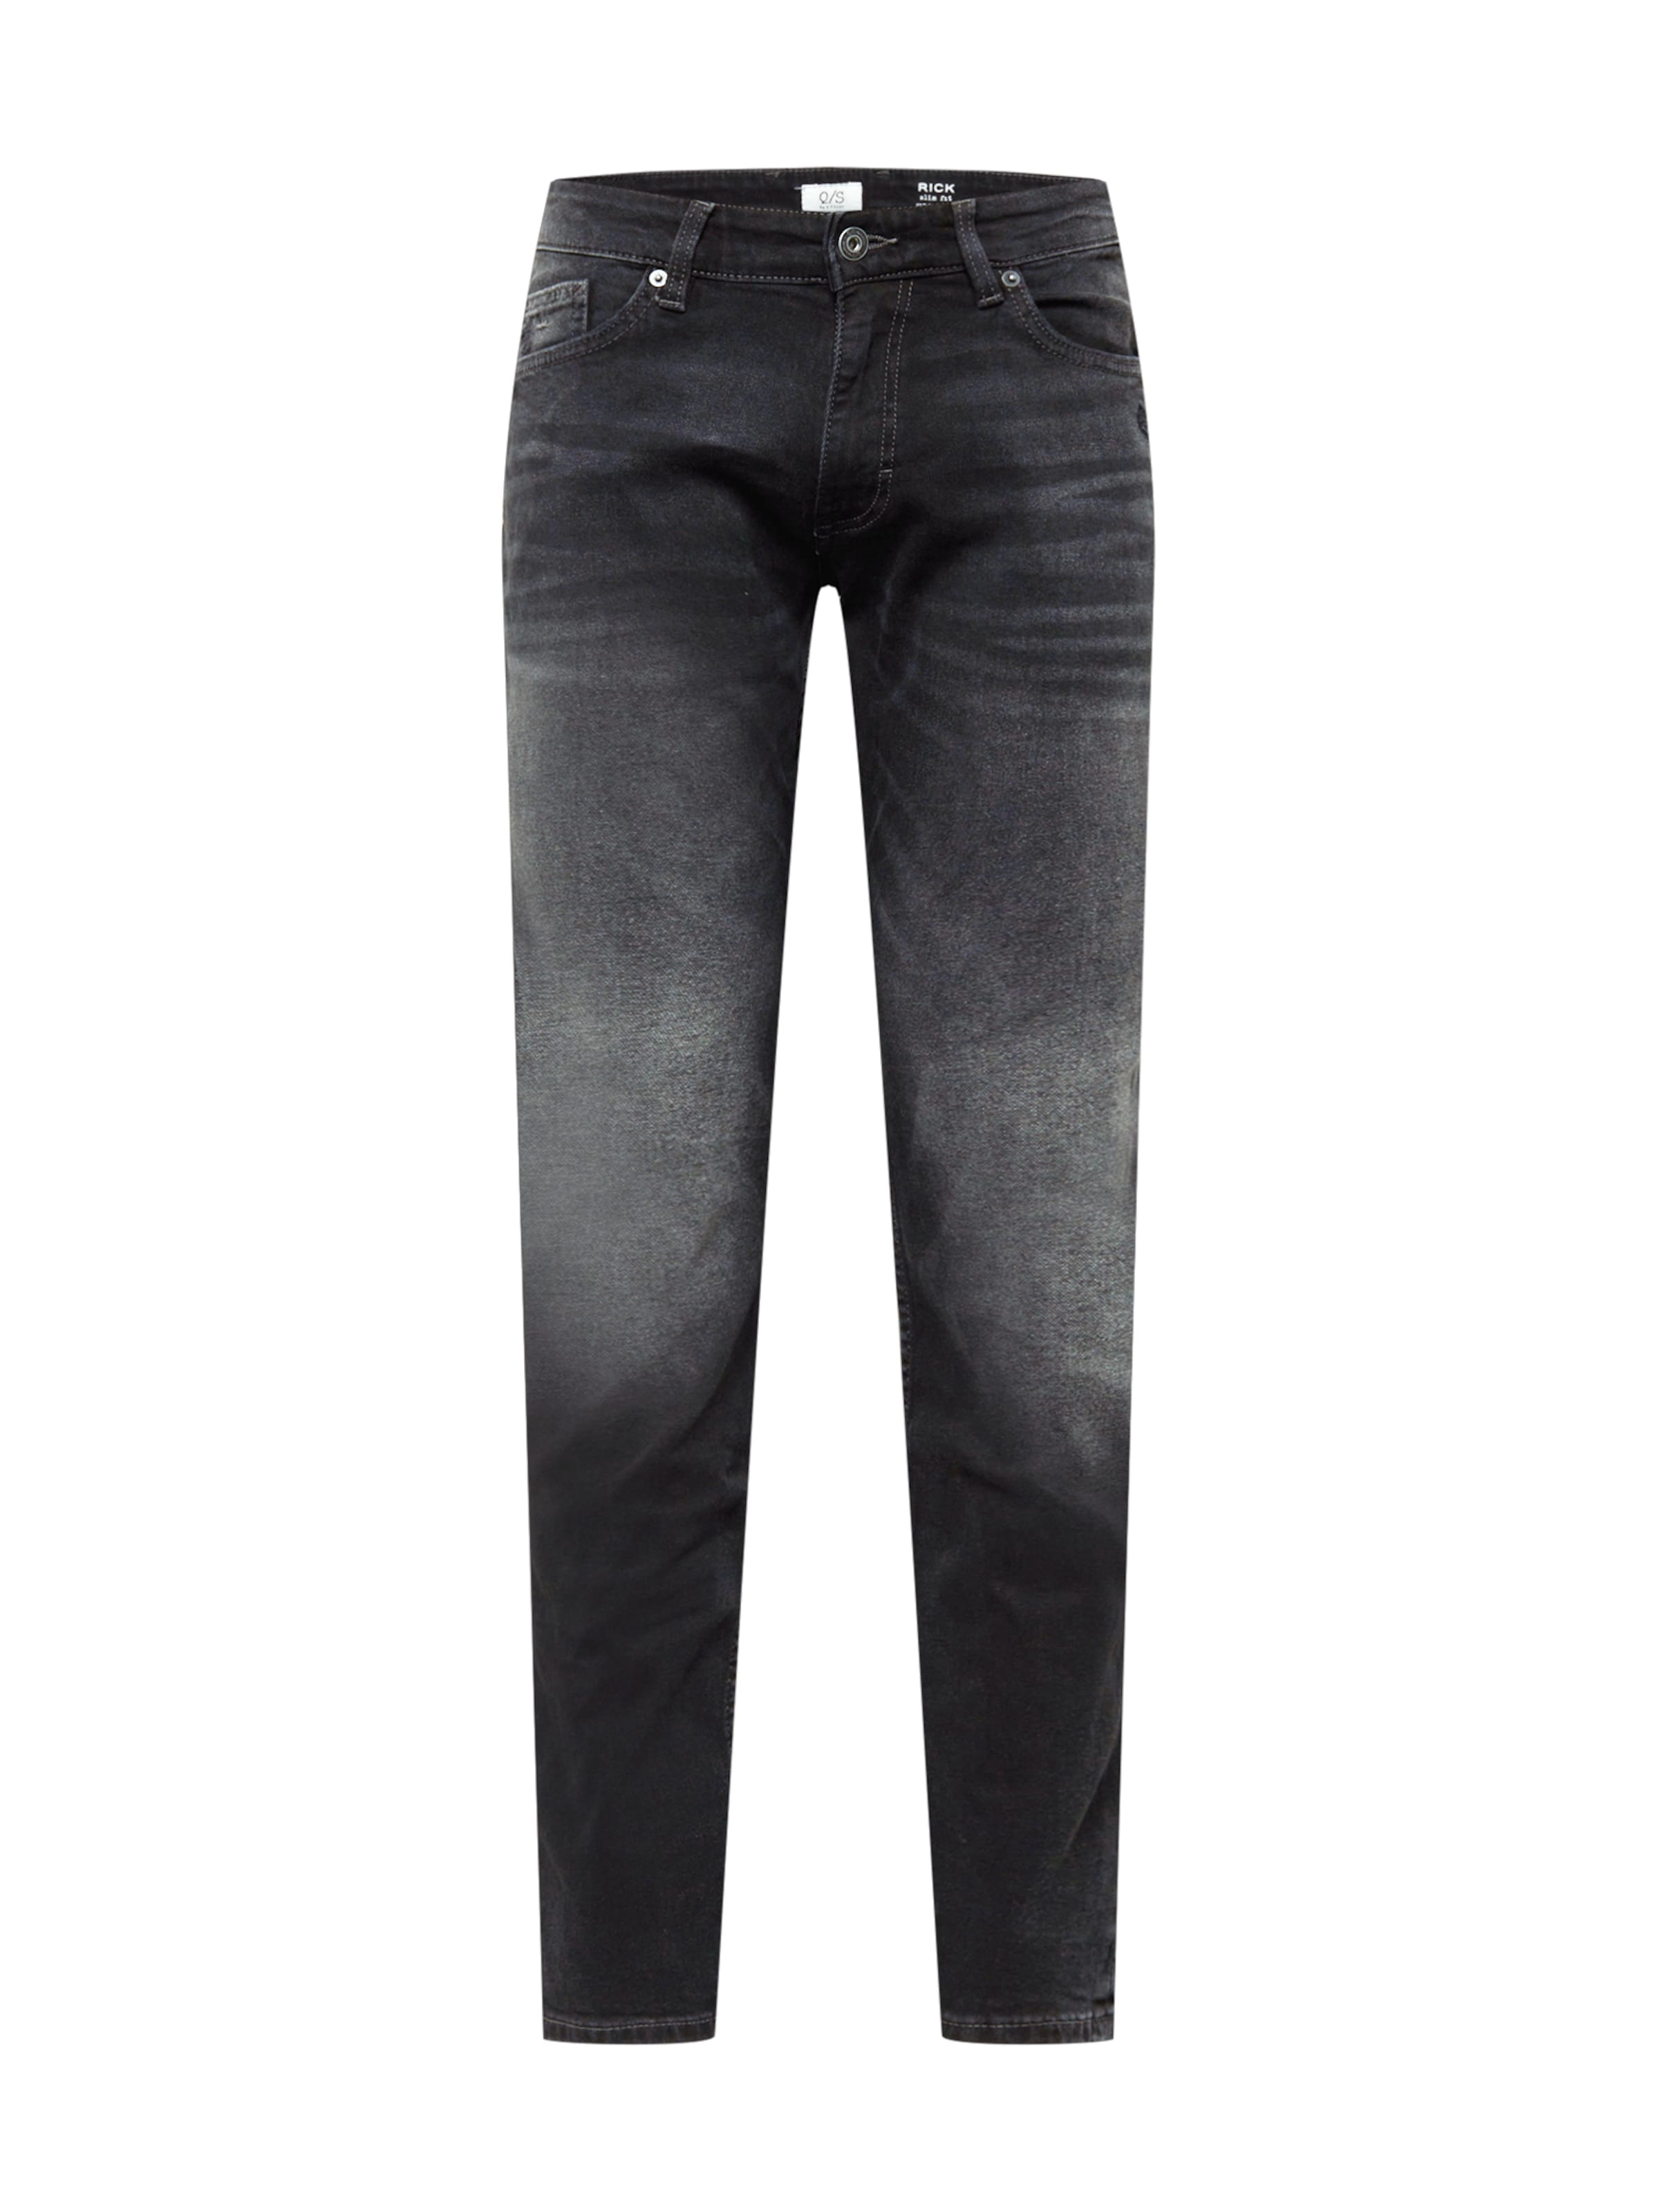 Männer Jeans QS by s.Oliver Jeans 'Rick' in Grau - GE20710